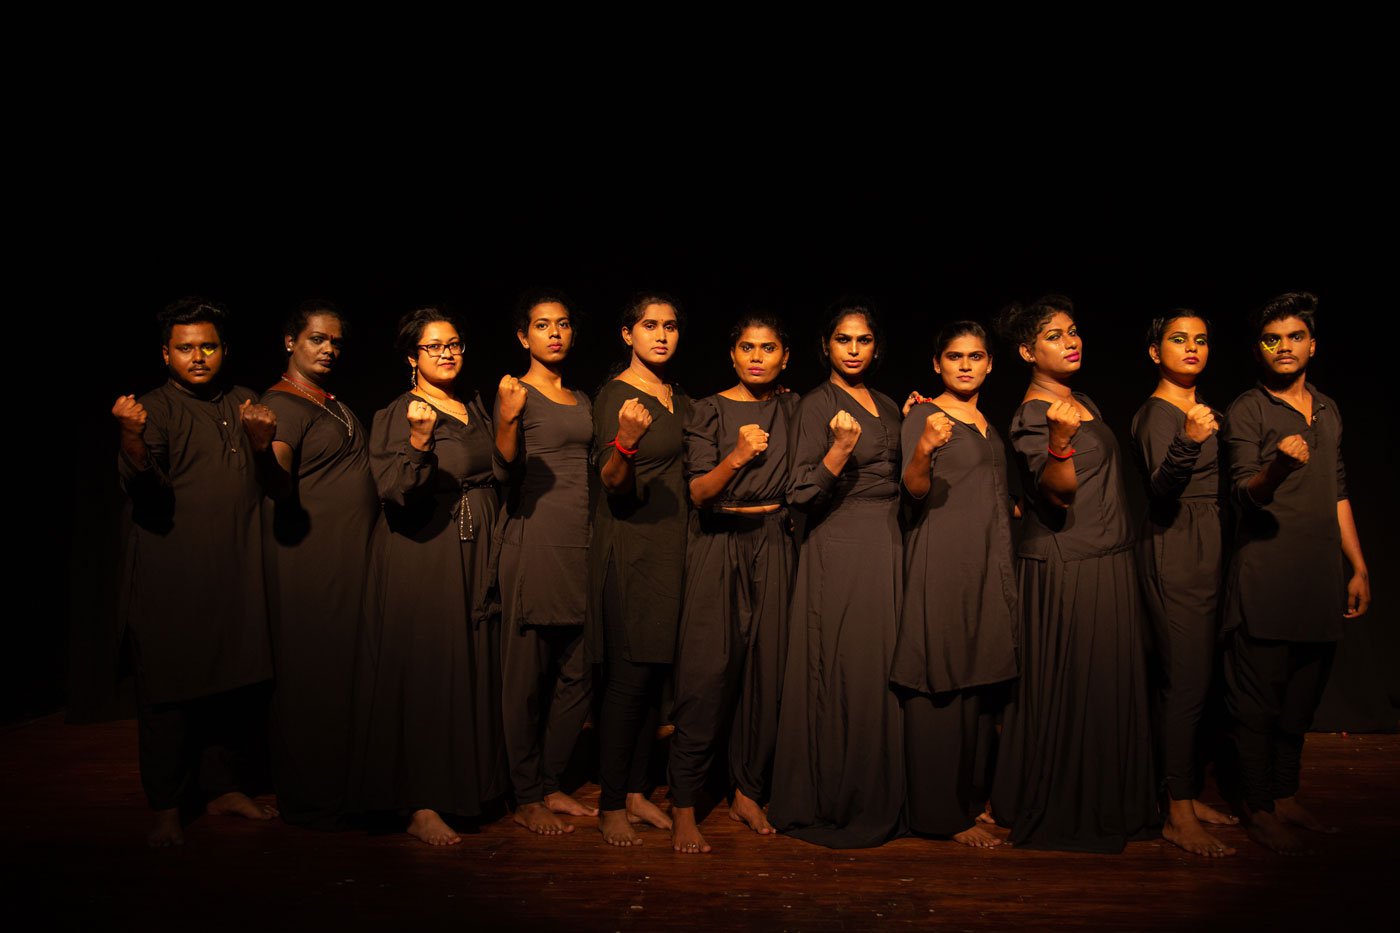 The team of artists who brought to life the forgotten history of trans community on stage through their play, Sandakaranga, held in November 2022